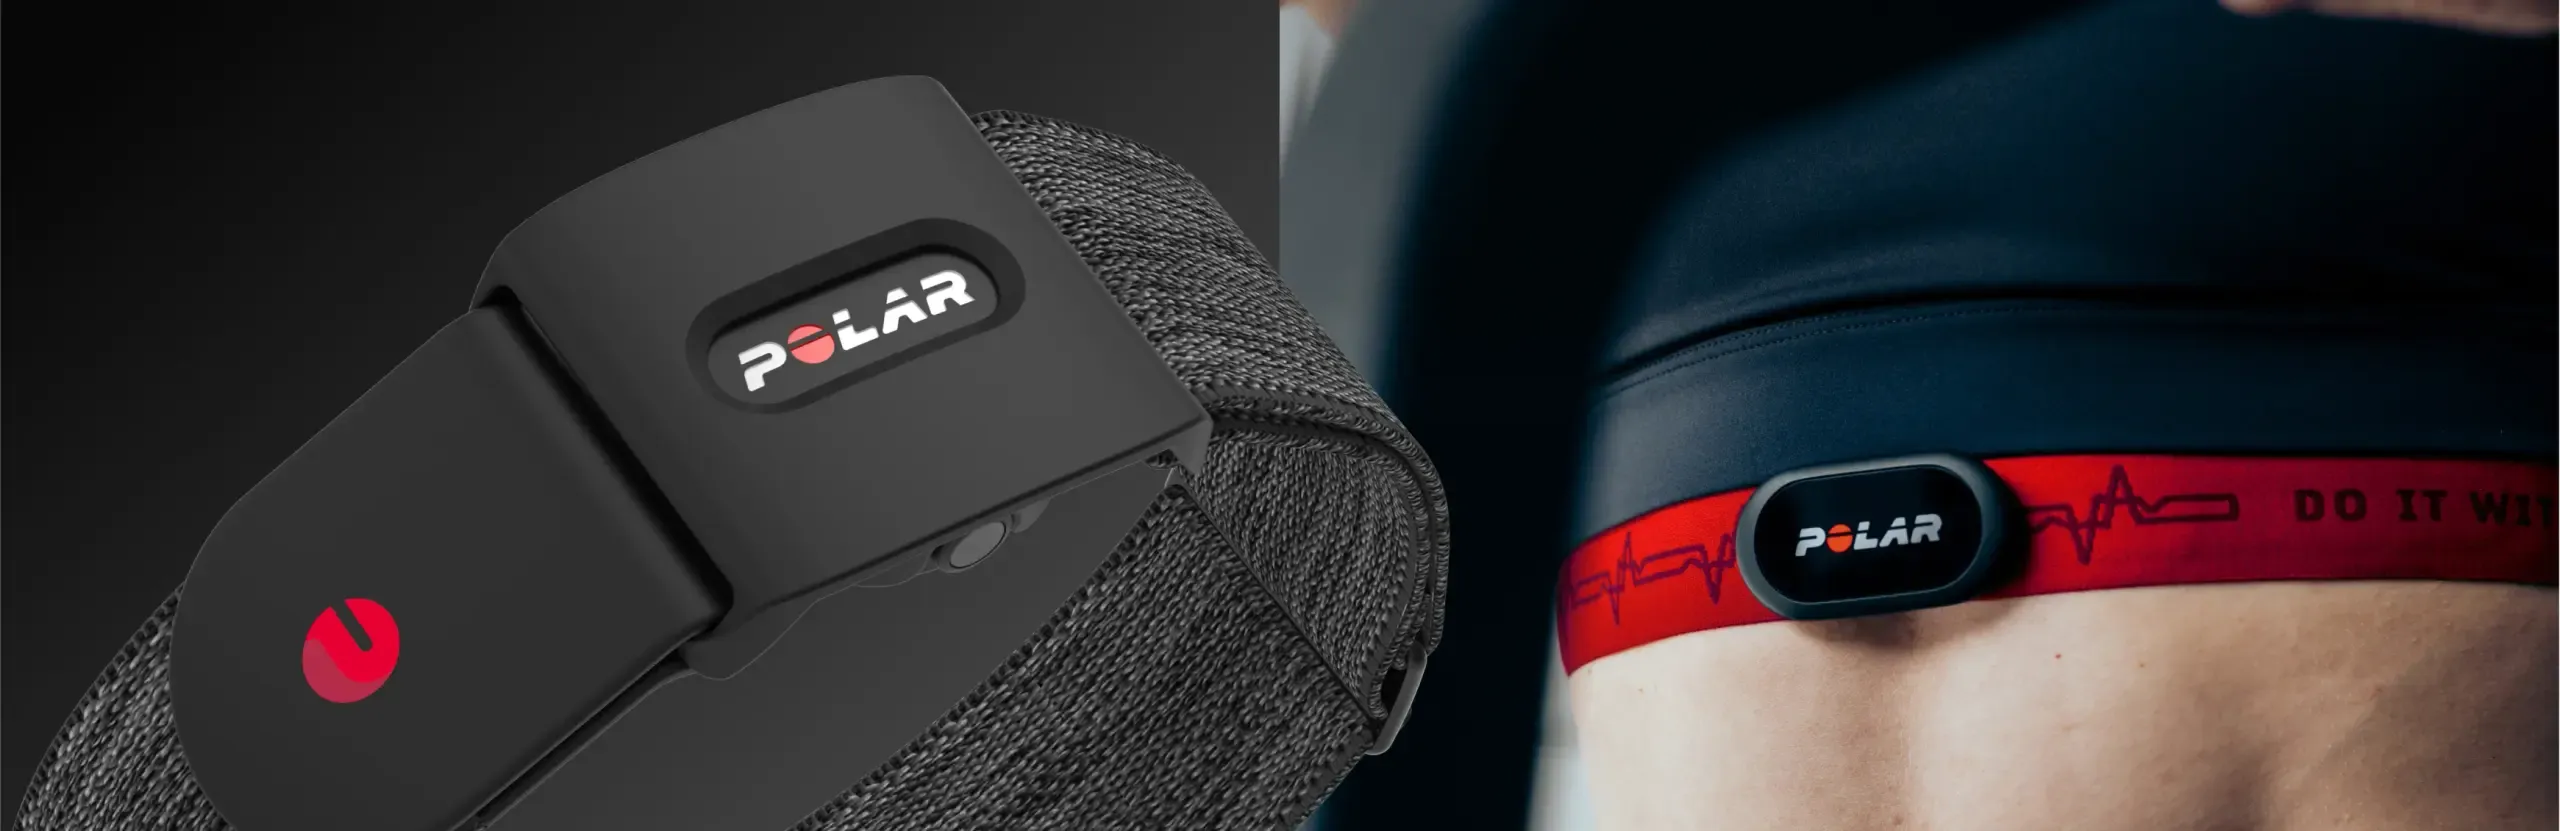 Polar's new tracker measures heart rate from just about anywhere